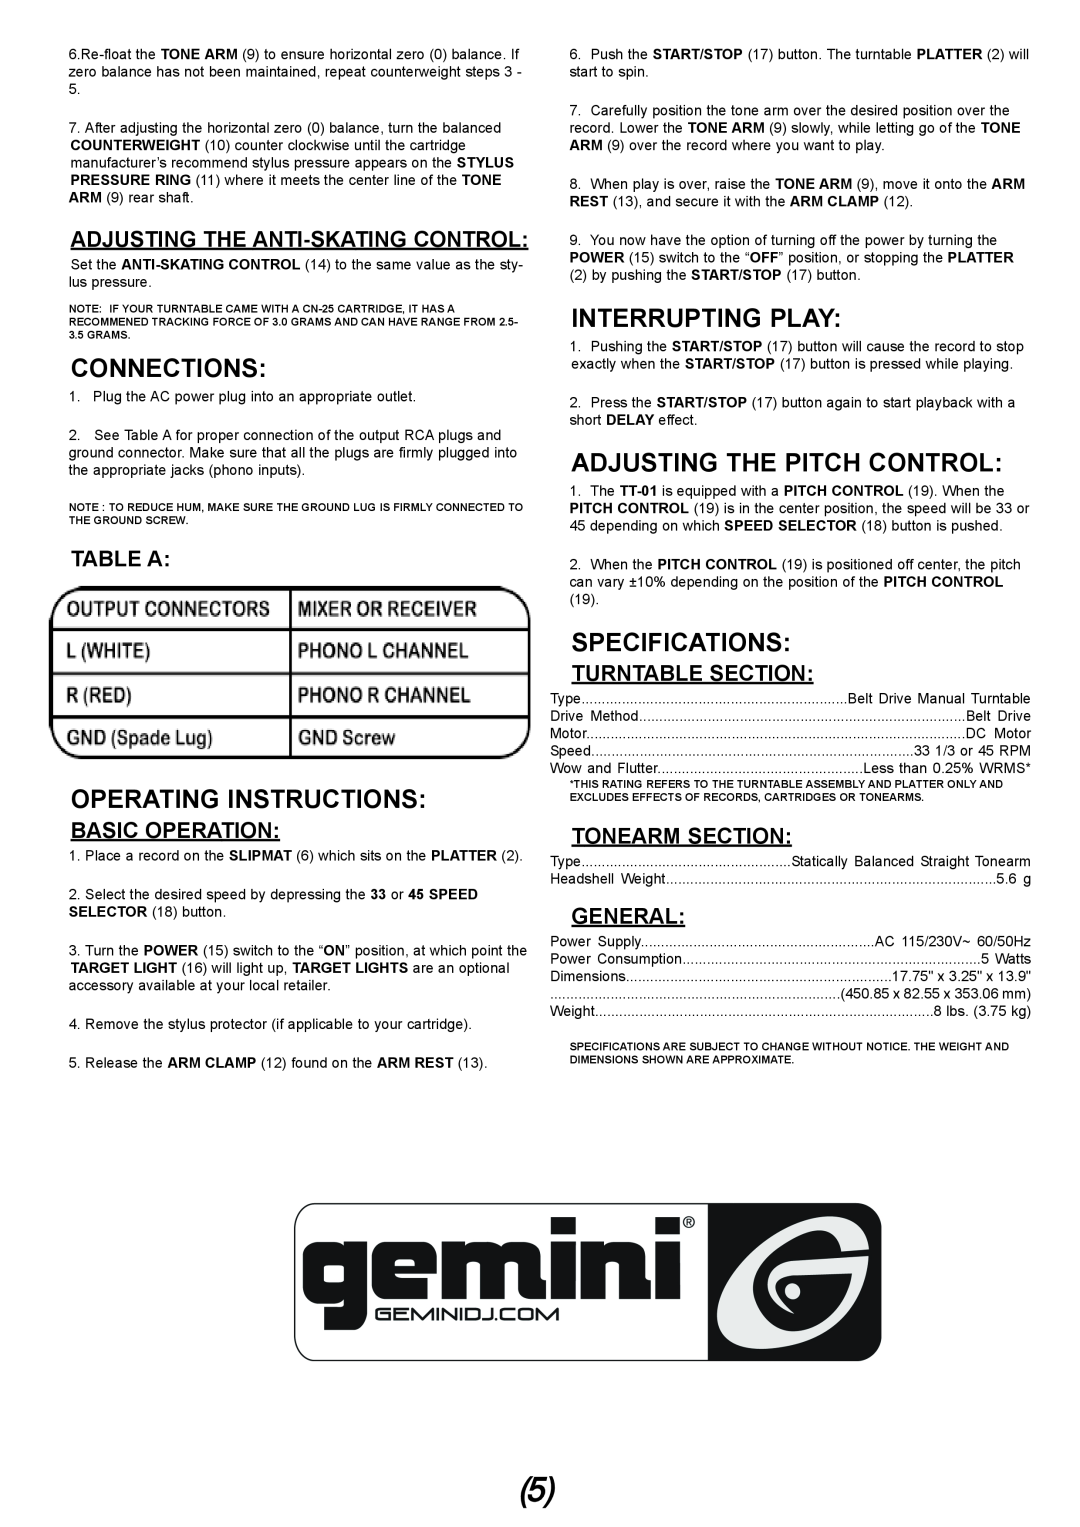 Gemini TT-01 Connections, Operating Instructions, Interrupting Play, Adjusting The Pitch Control, Specifications, Table A 